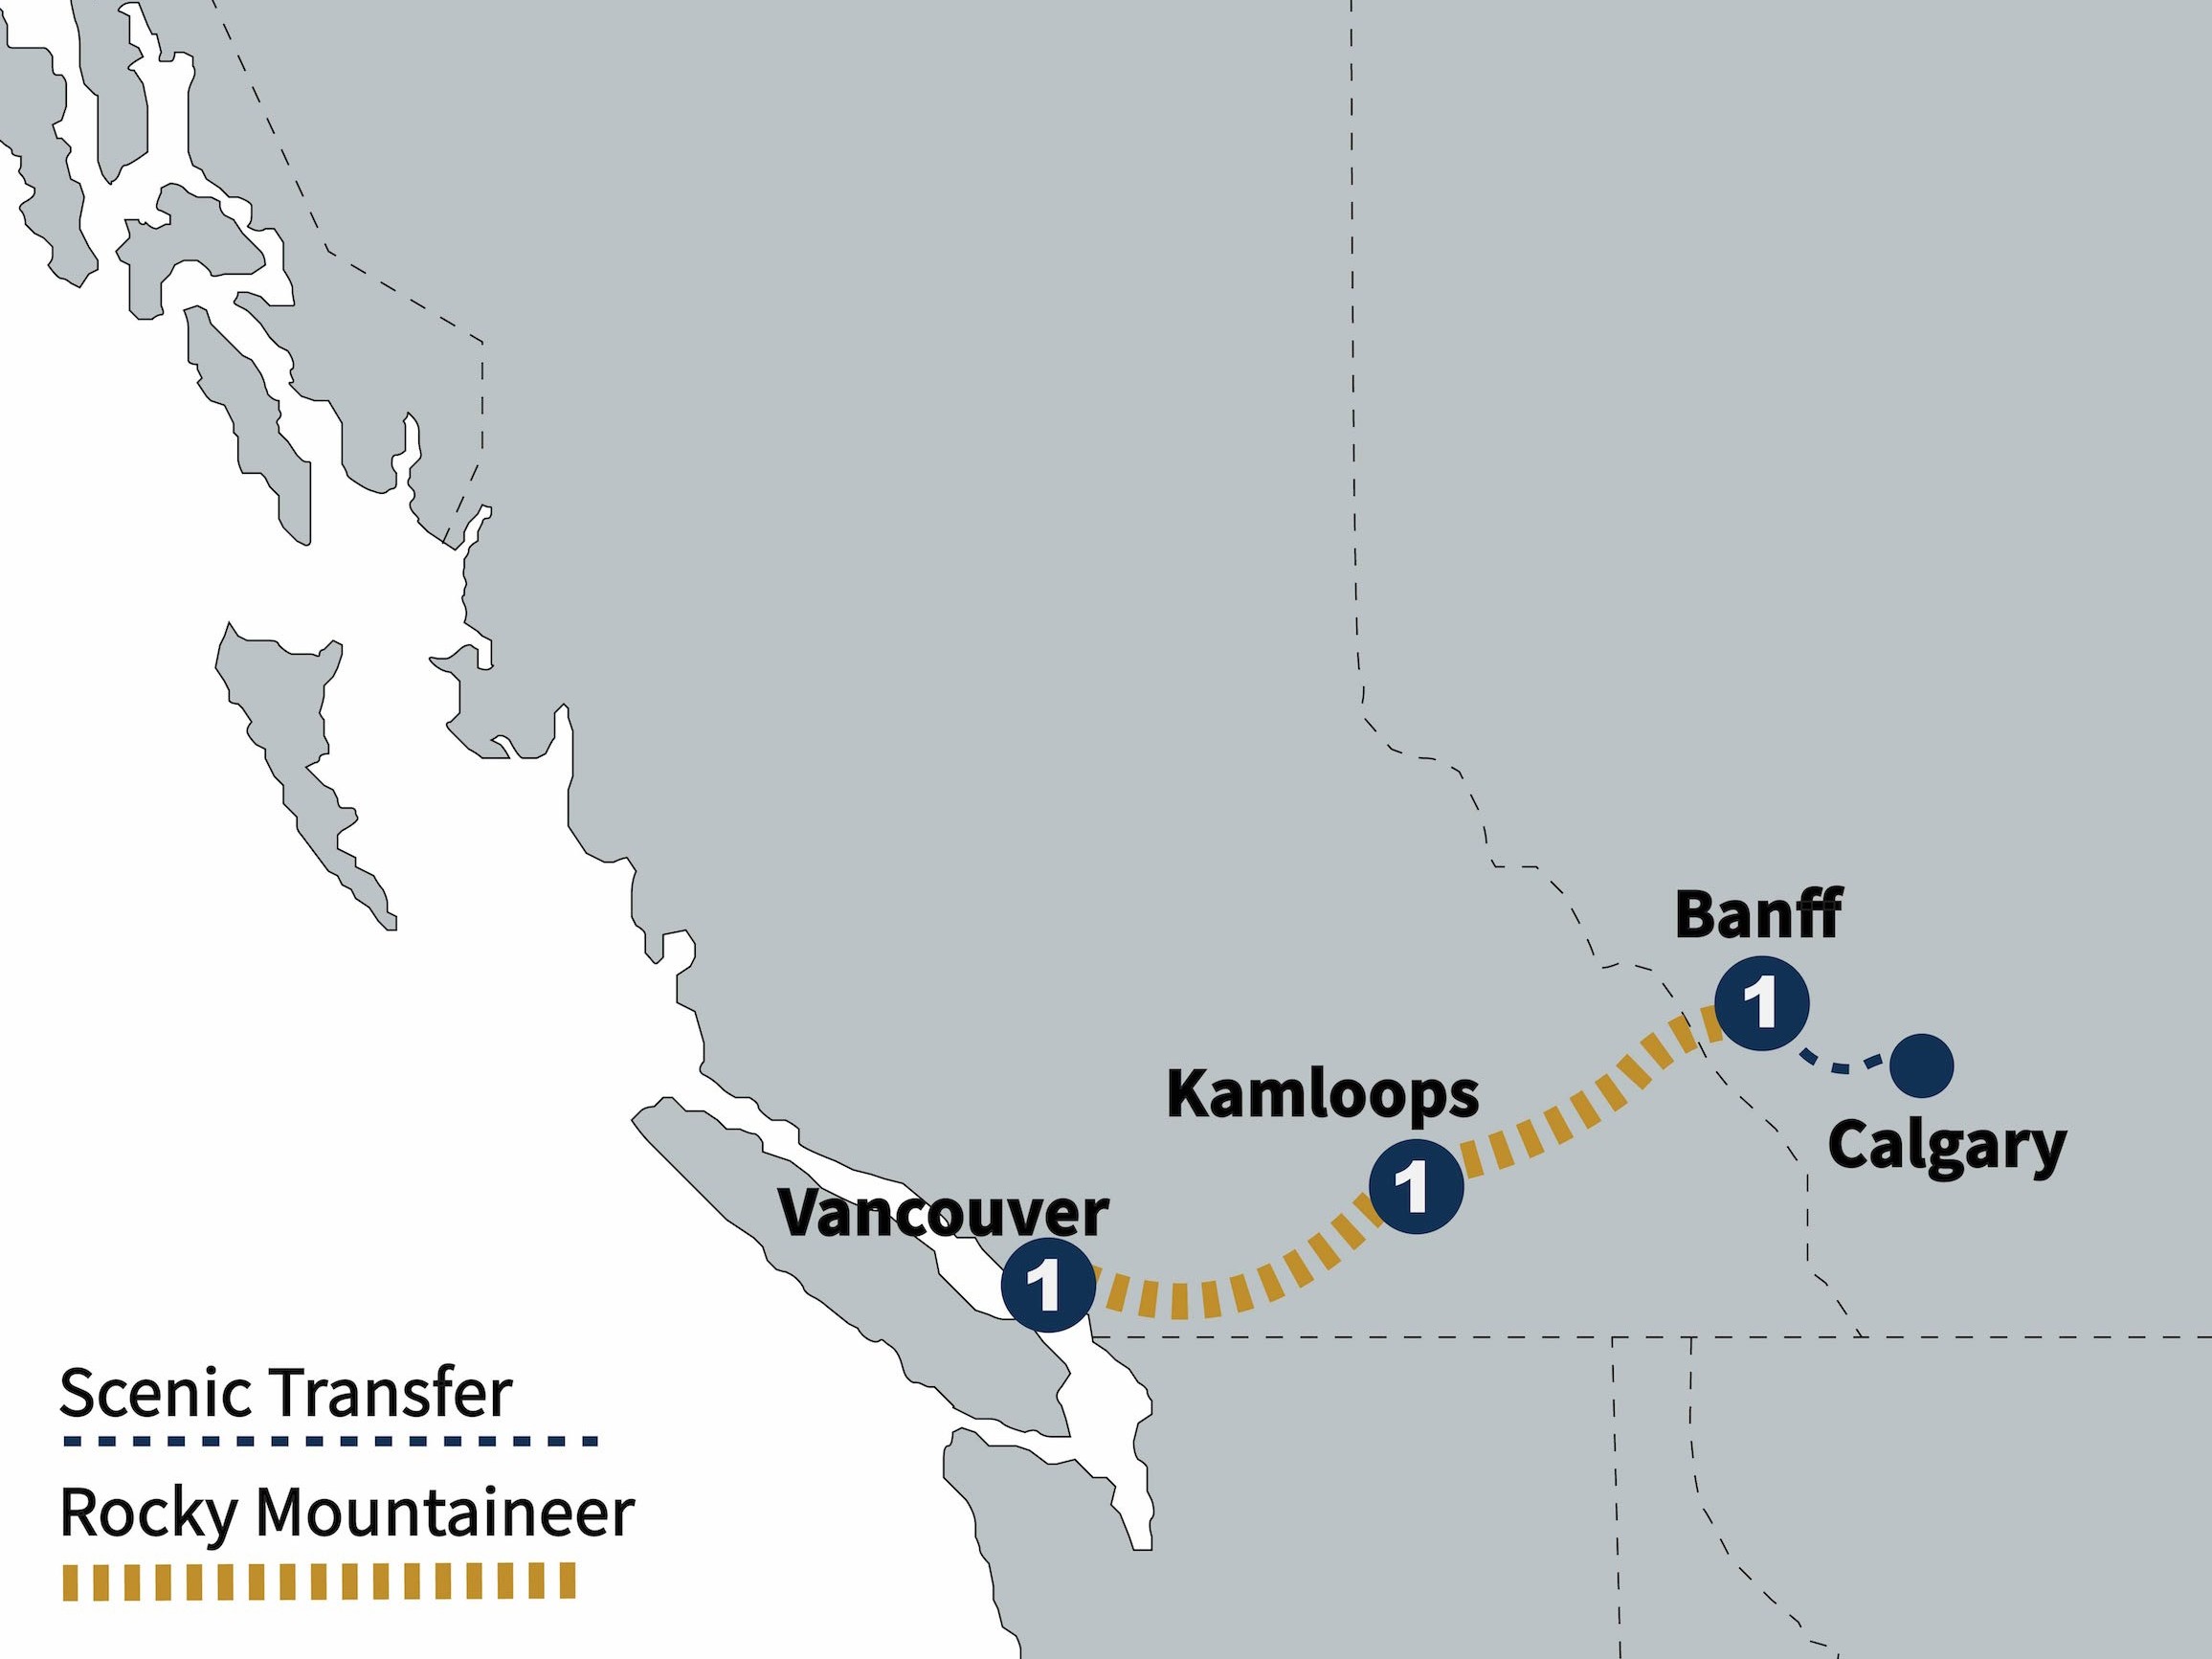 train tour from vancouver to calgary